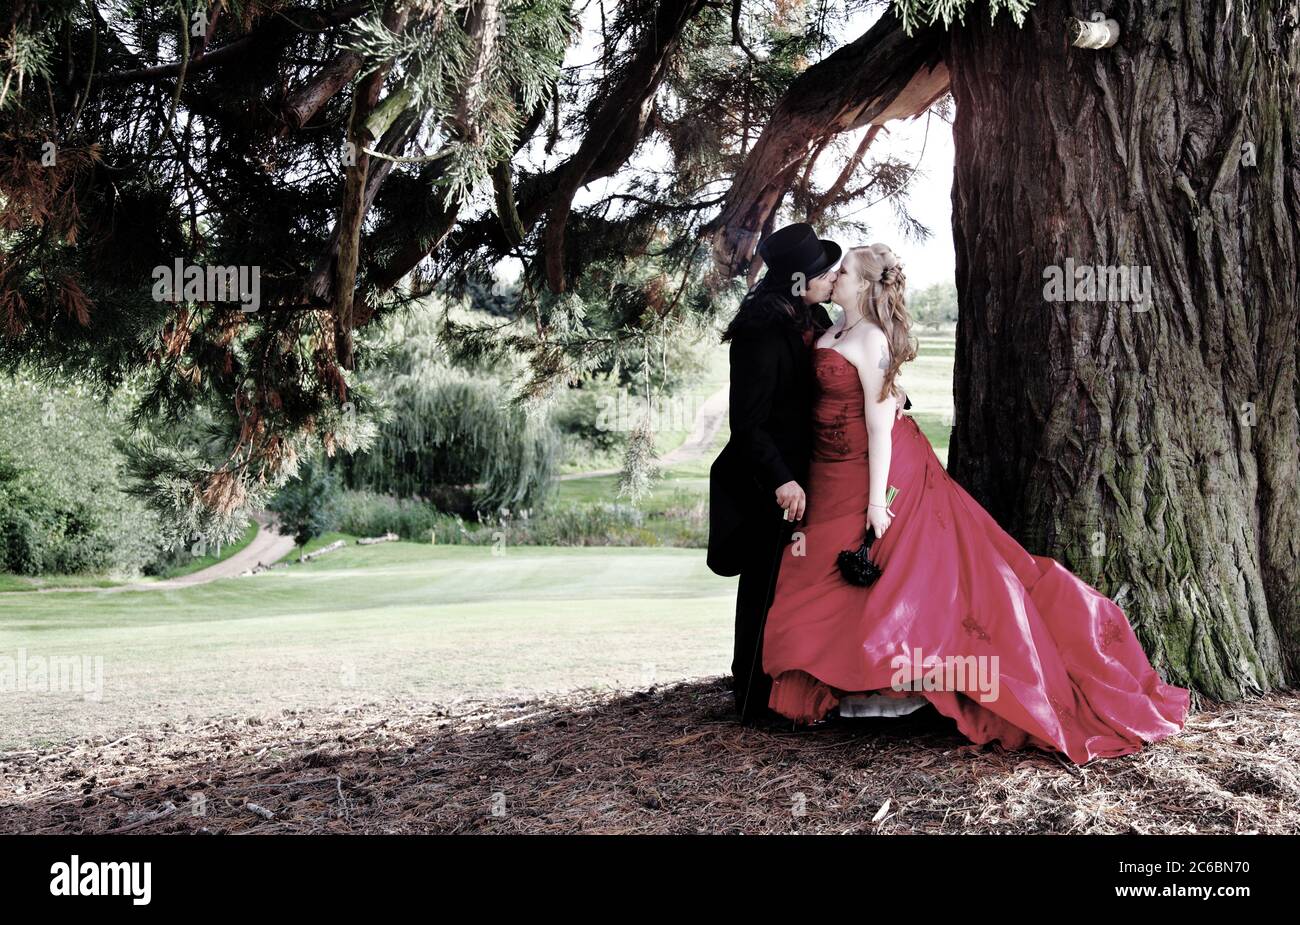 Groom thirties & bride twenties in goth wedding fashion with red dress, gothic top hat, tails & cane. Couple kissing under a tree. Stock Photo